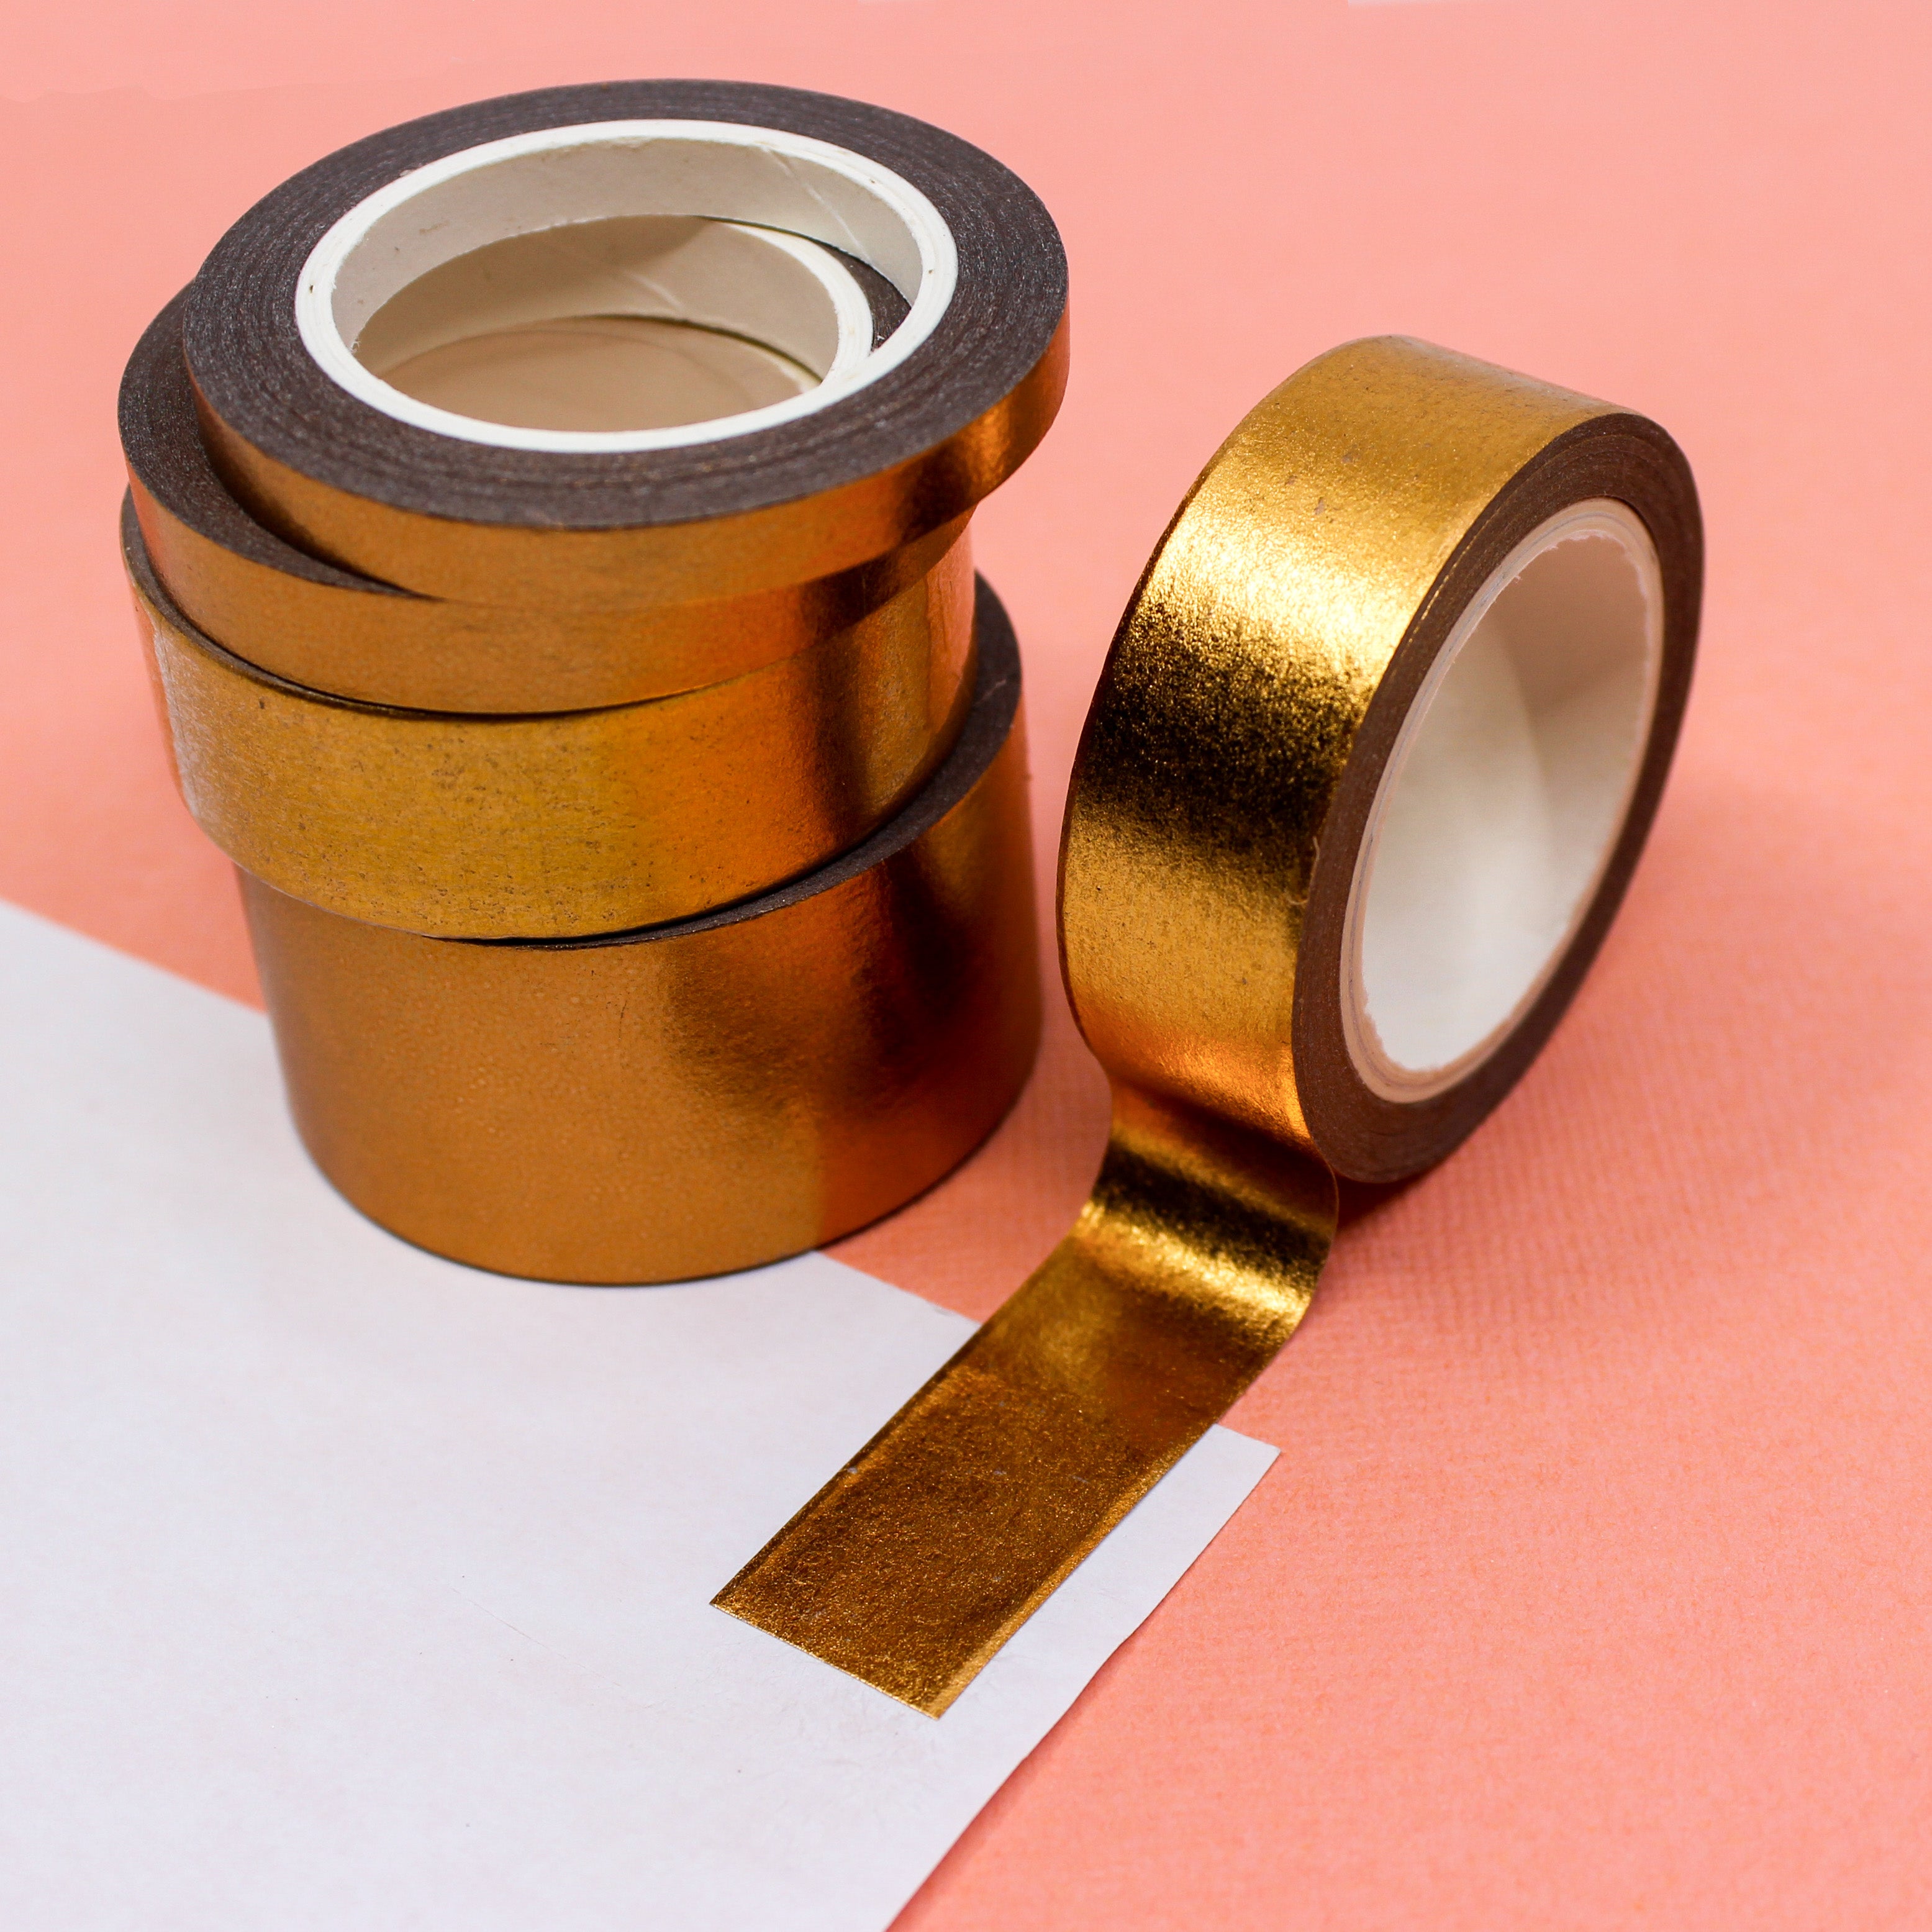 Add a touch of luxury to your crafts with our solid foil  washi tape, featuring a stunning metallic Copper finish that brings an elegant and glamorous flair to your projects. These solid foil tapes are only sold exclusively at BBB Supplies Craft Shop.